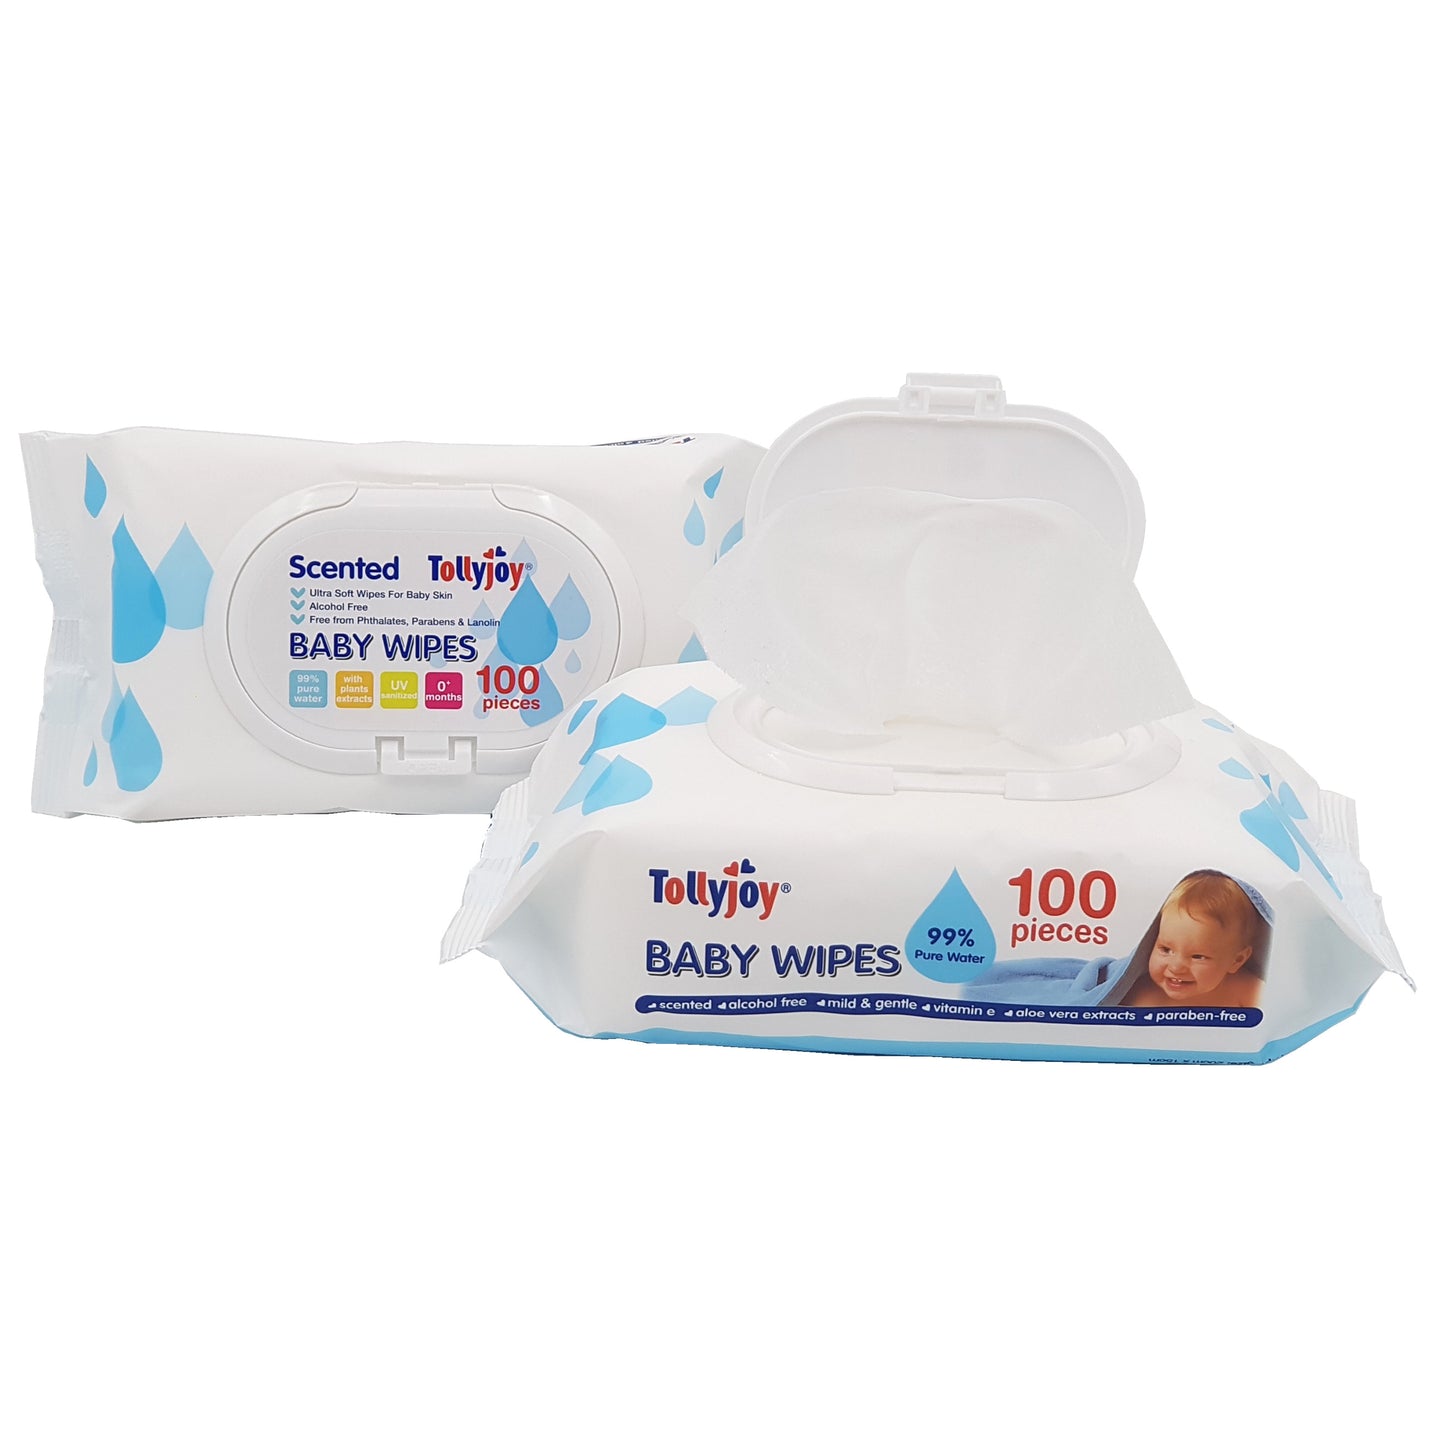 Tollyjoy Scented Wet Wipes 2 x 100s (30613)